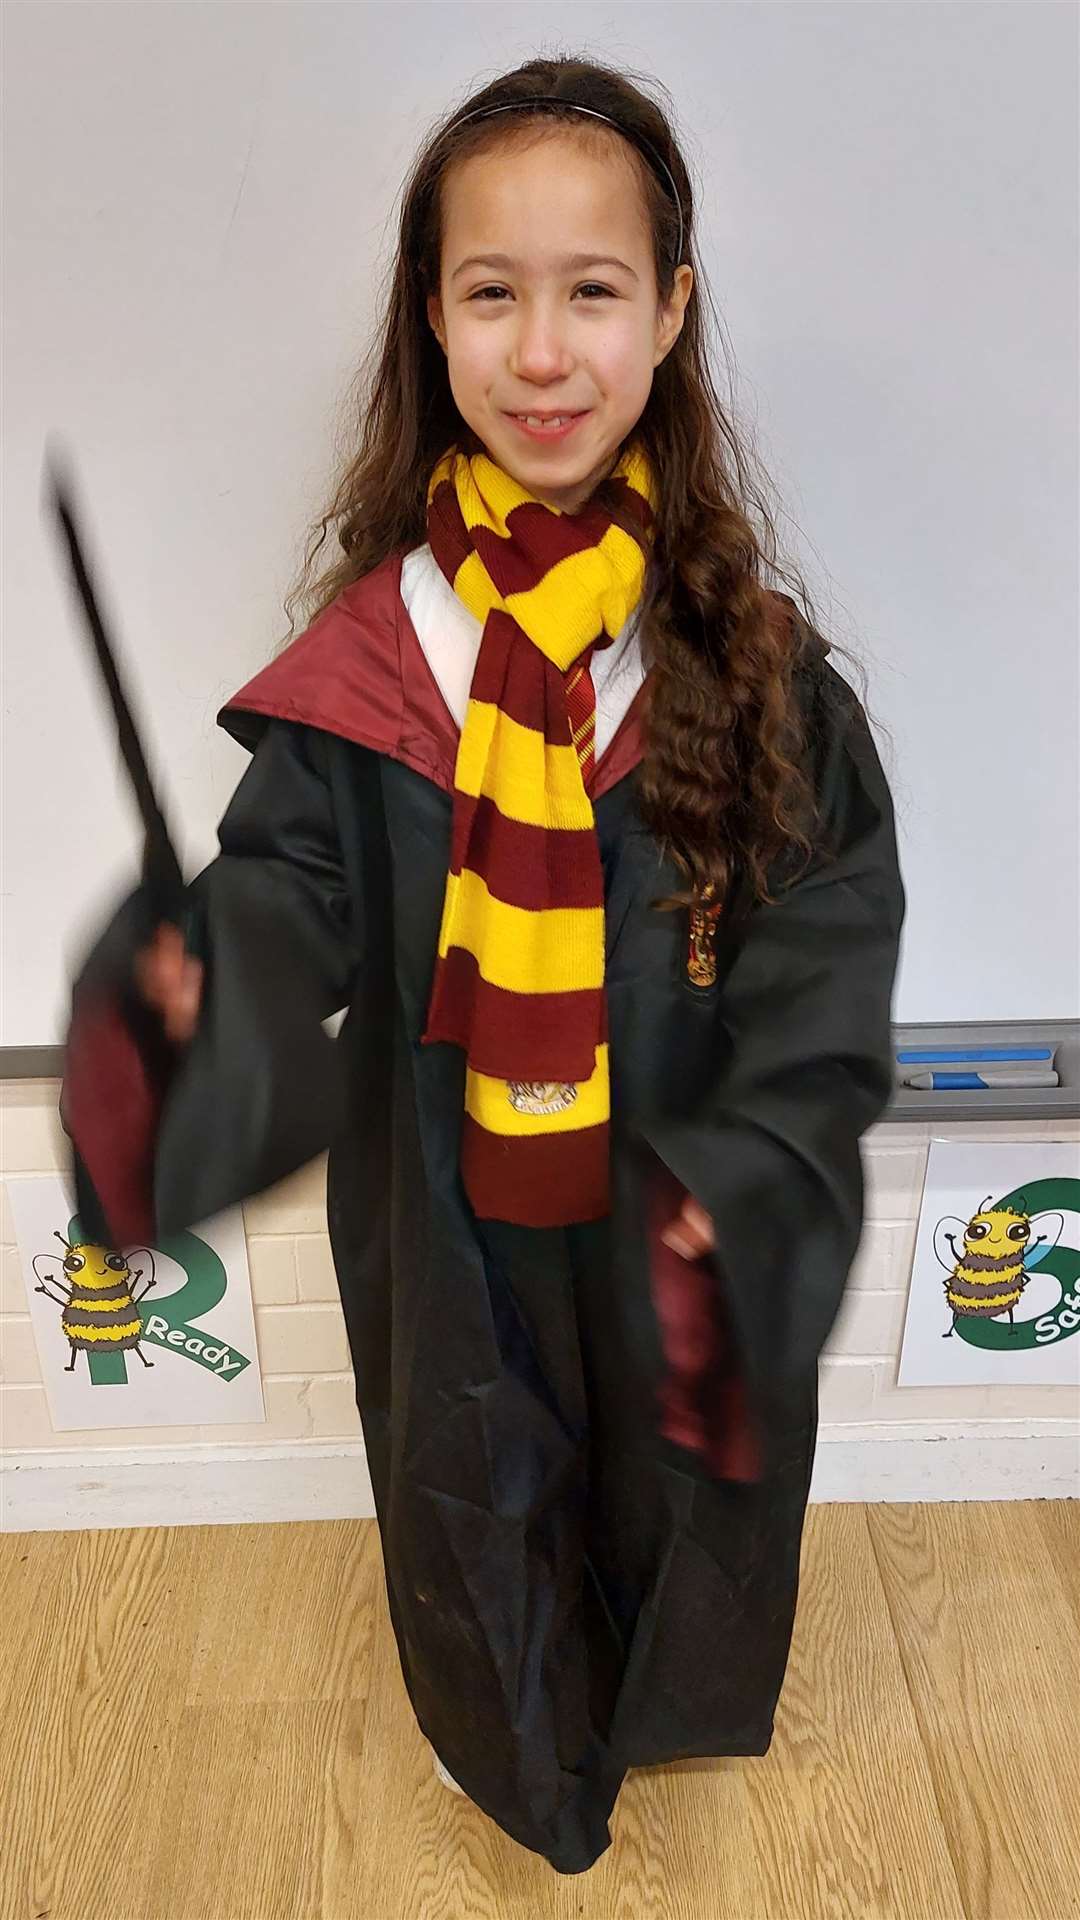 Harry Potter provided inspiration for some of the costumes.